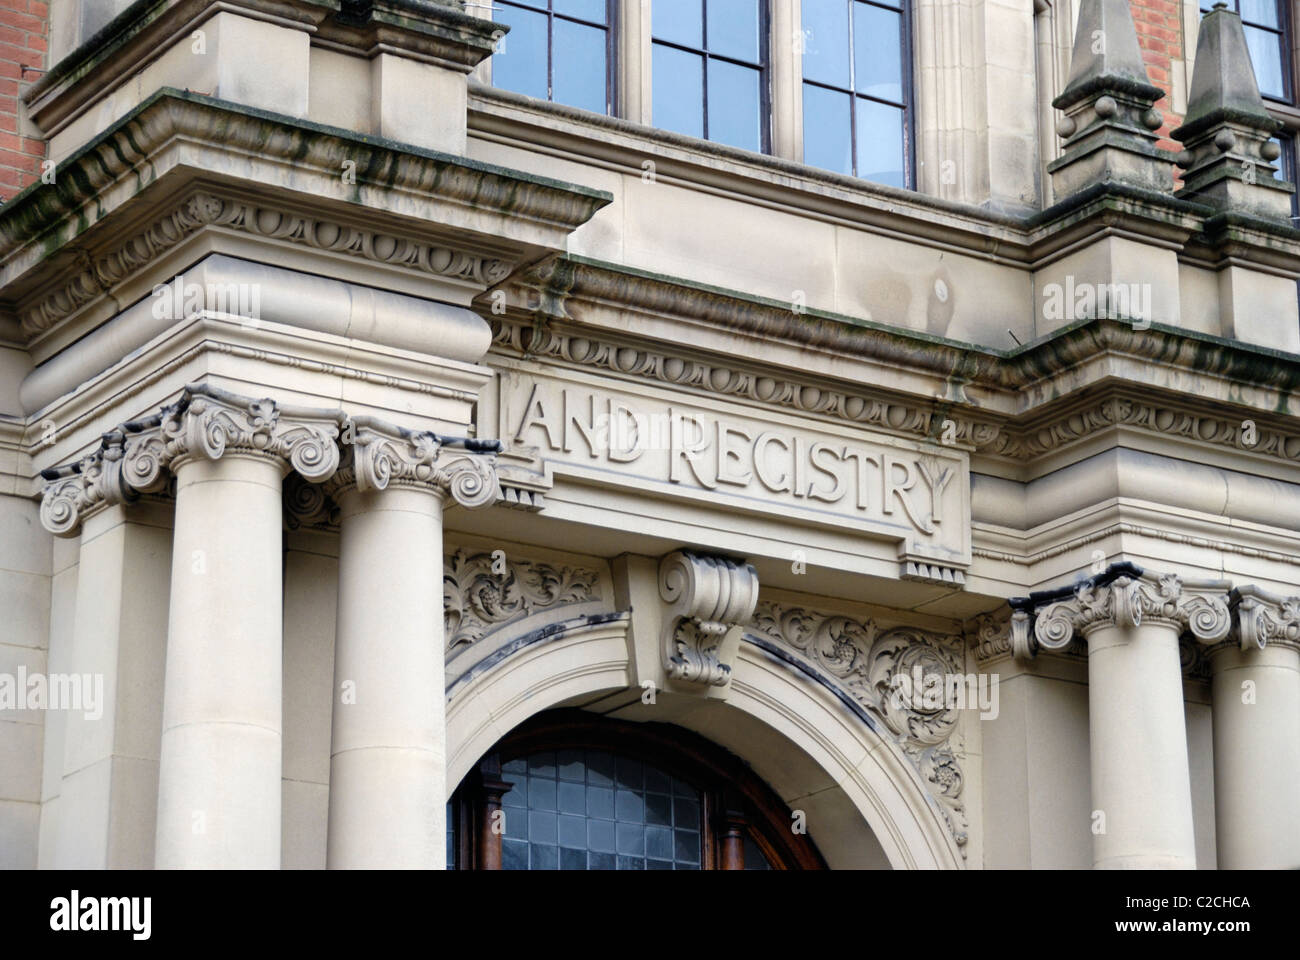 Headquarters of the Land Registry in Lincoln’s Inn Fields, London, England Stock Photo